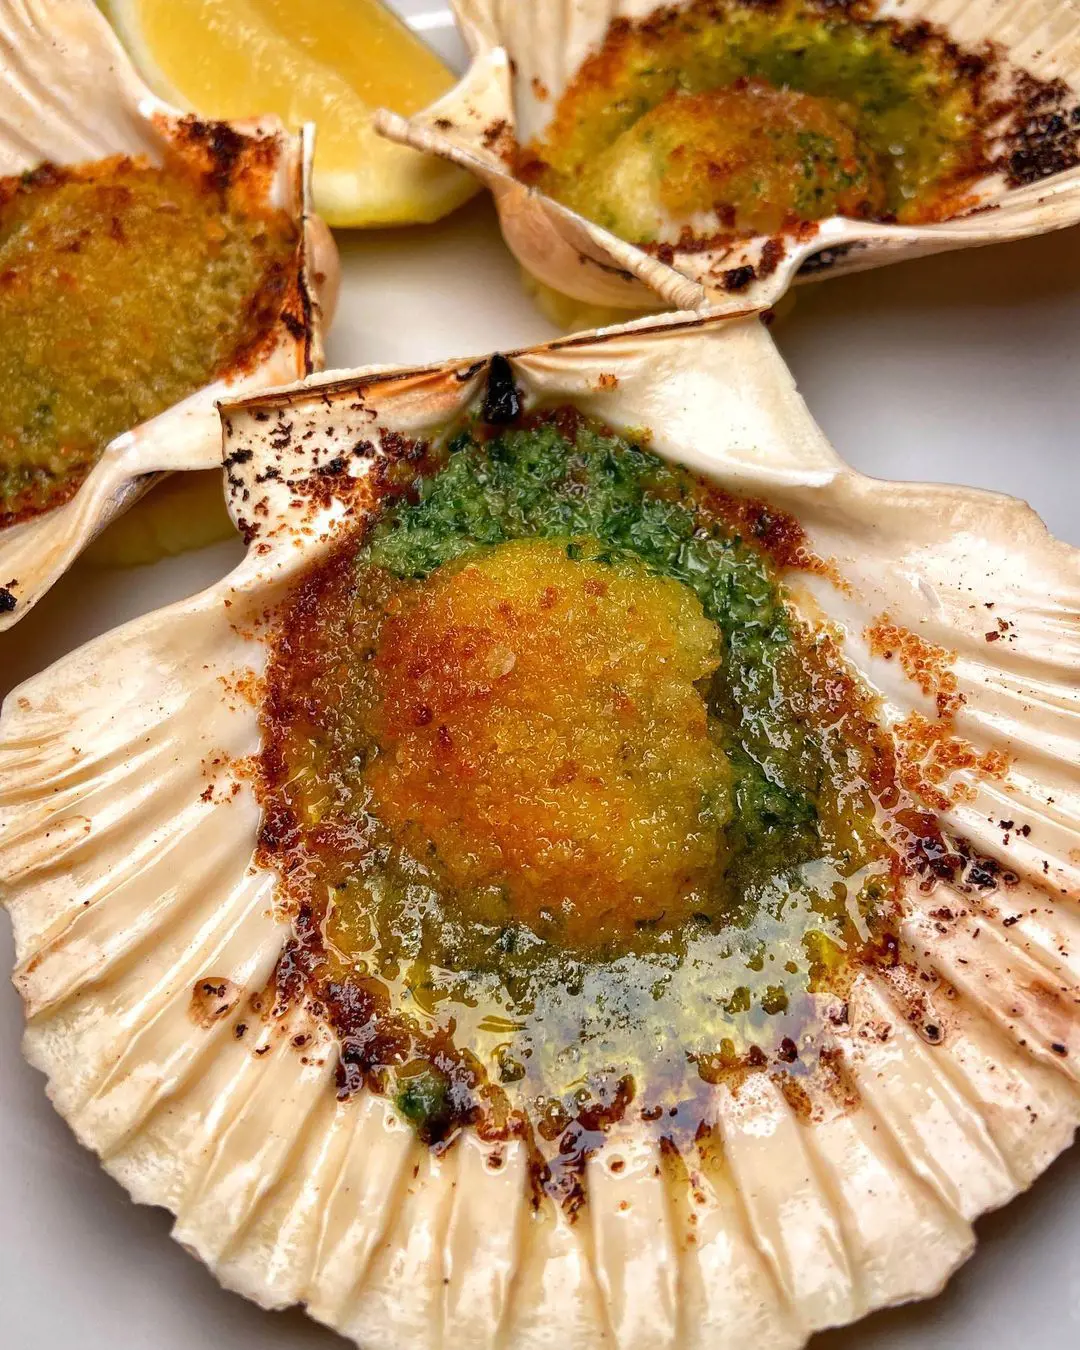 Roasted scallops with white port and garlic